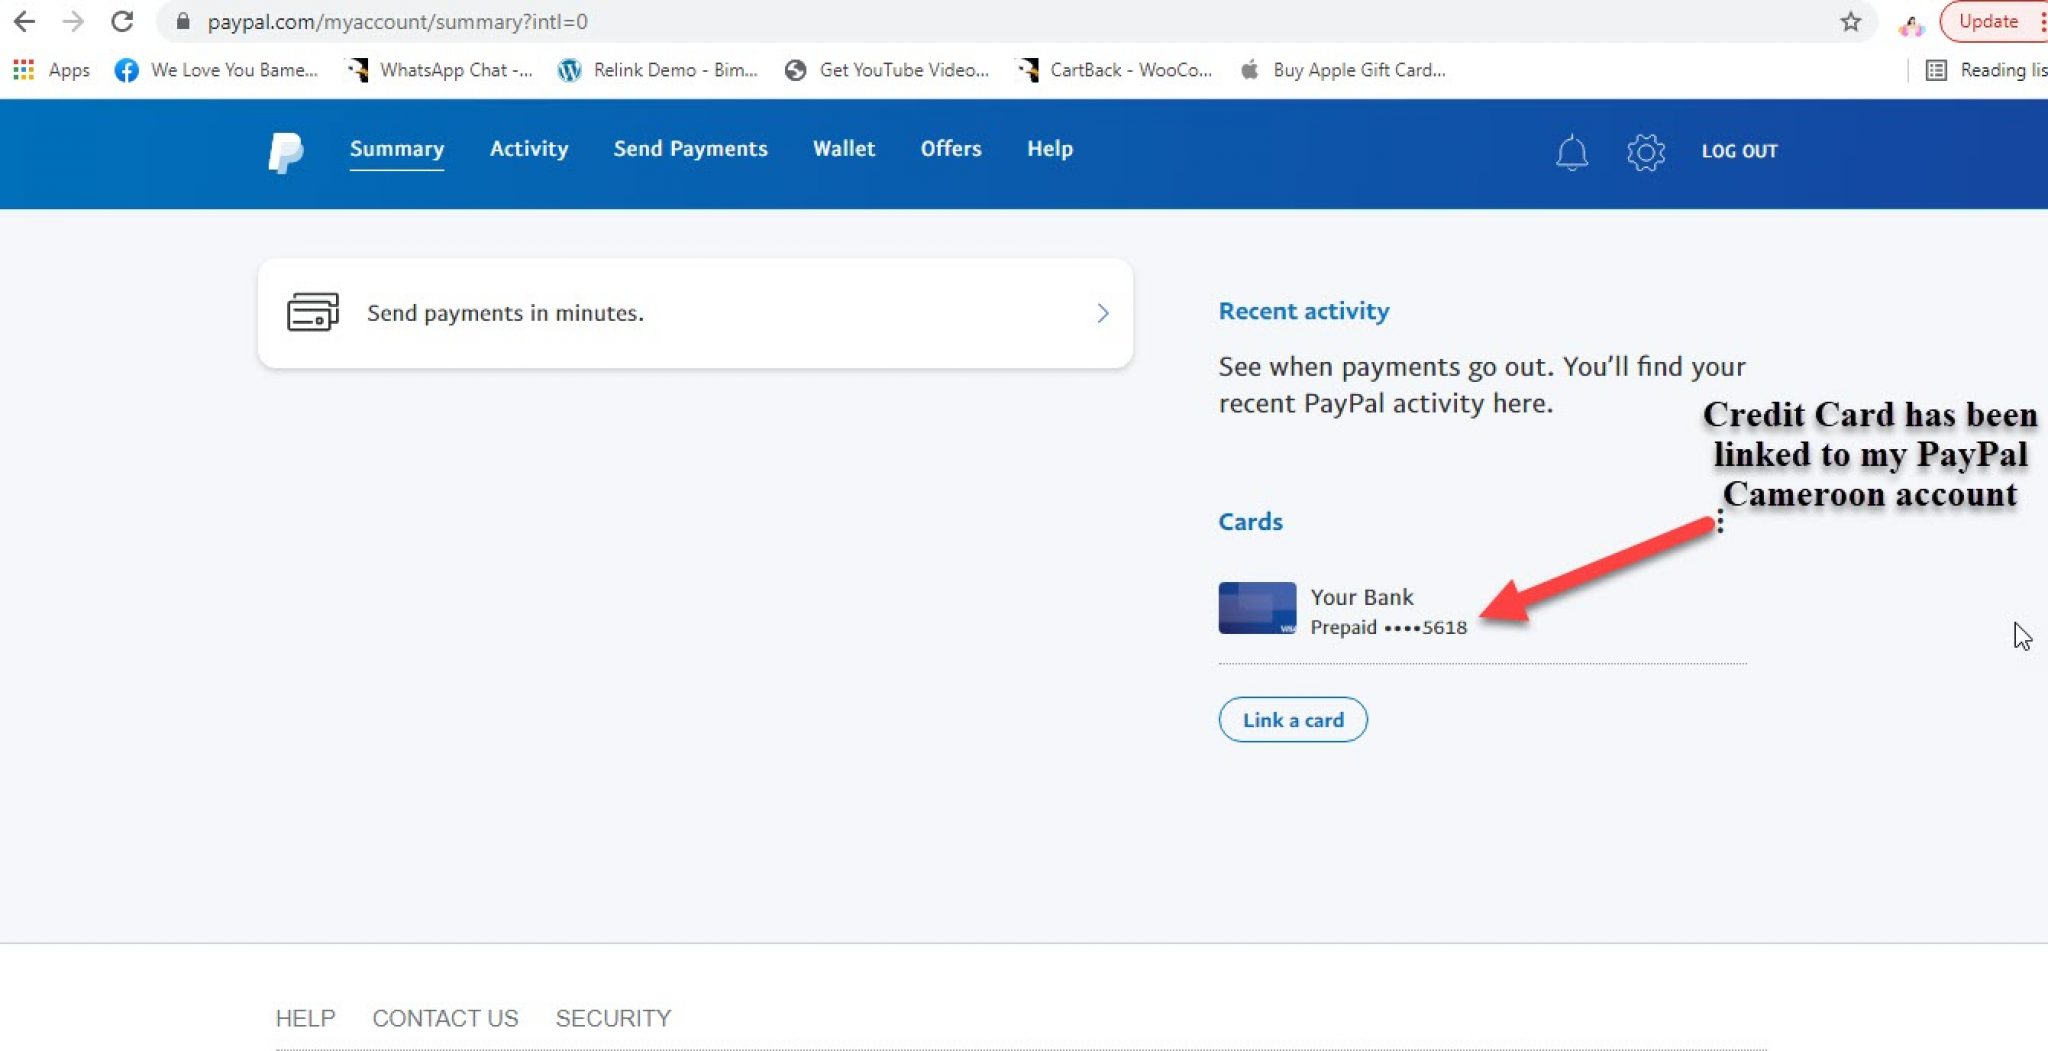 How to Create a PayPal Account in Cameroon that Receives Money